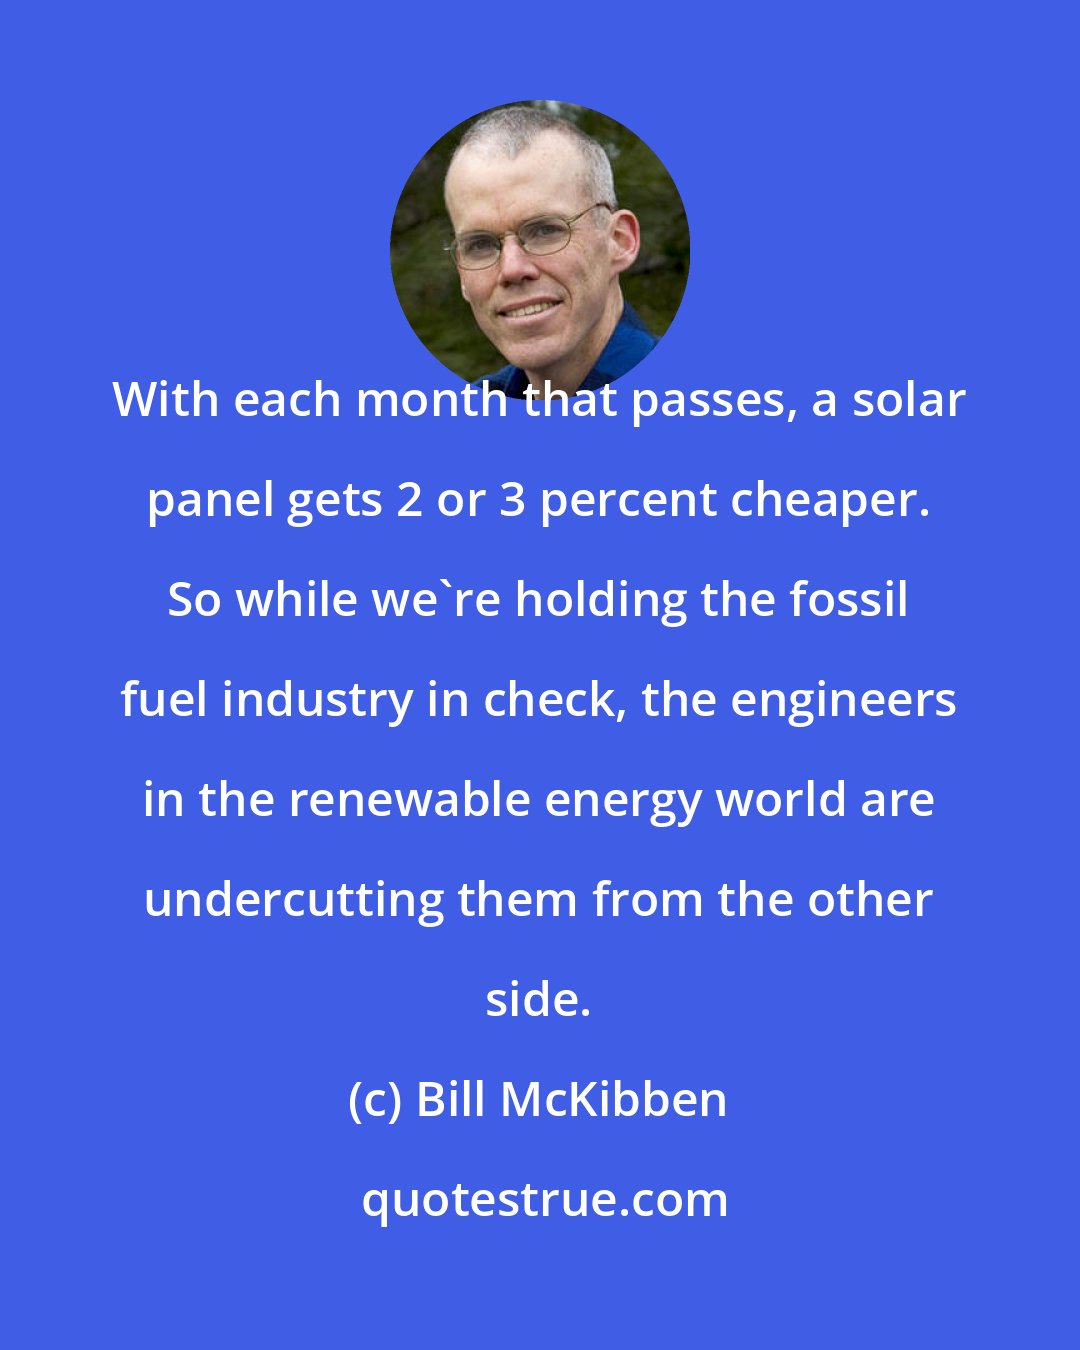 Bill McKibben: With each month that passes, a solar panel gets 2 or 3 percent cheaper. So while we're holding the fossil fuel industry in check, the engineers in the renewable energy world are undercutting them from the other side.